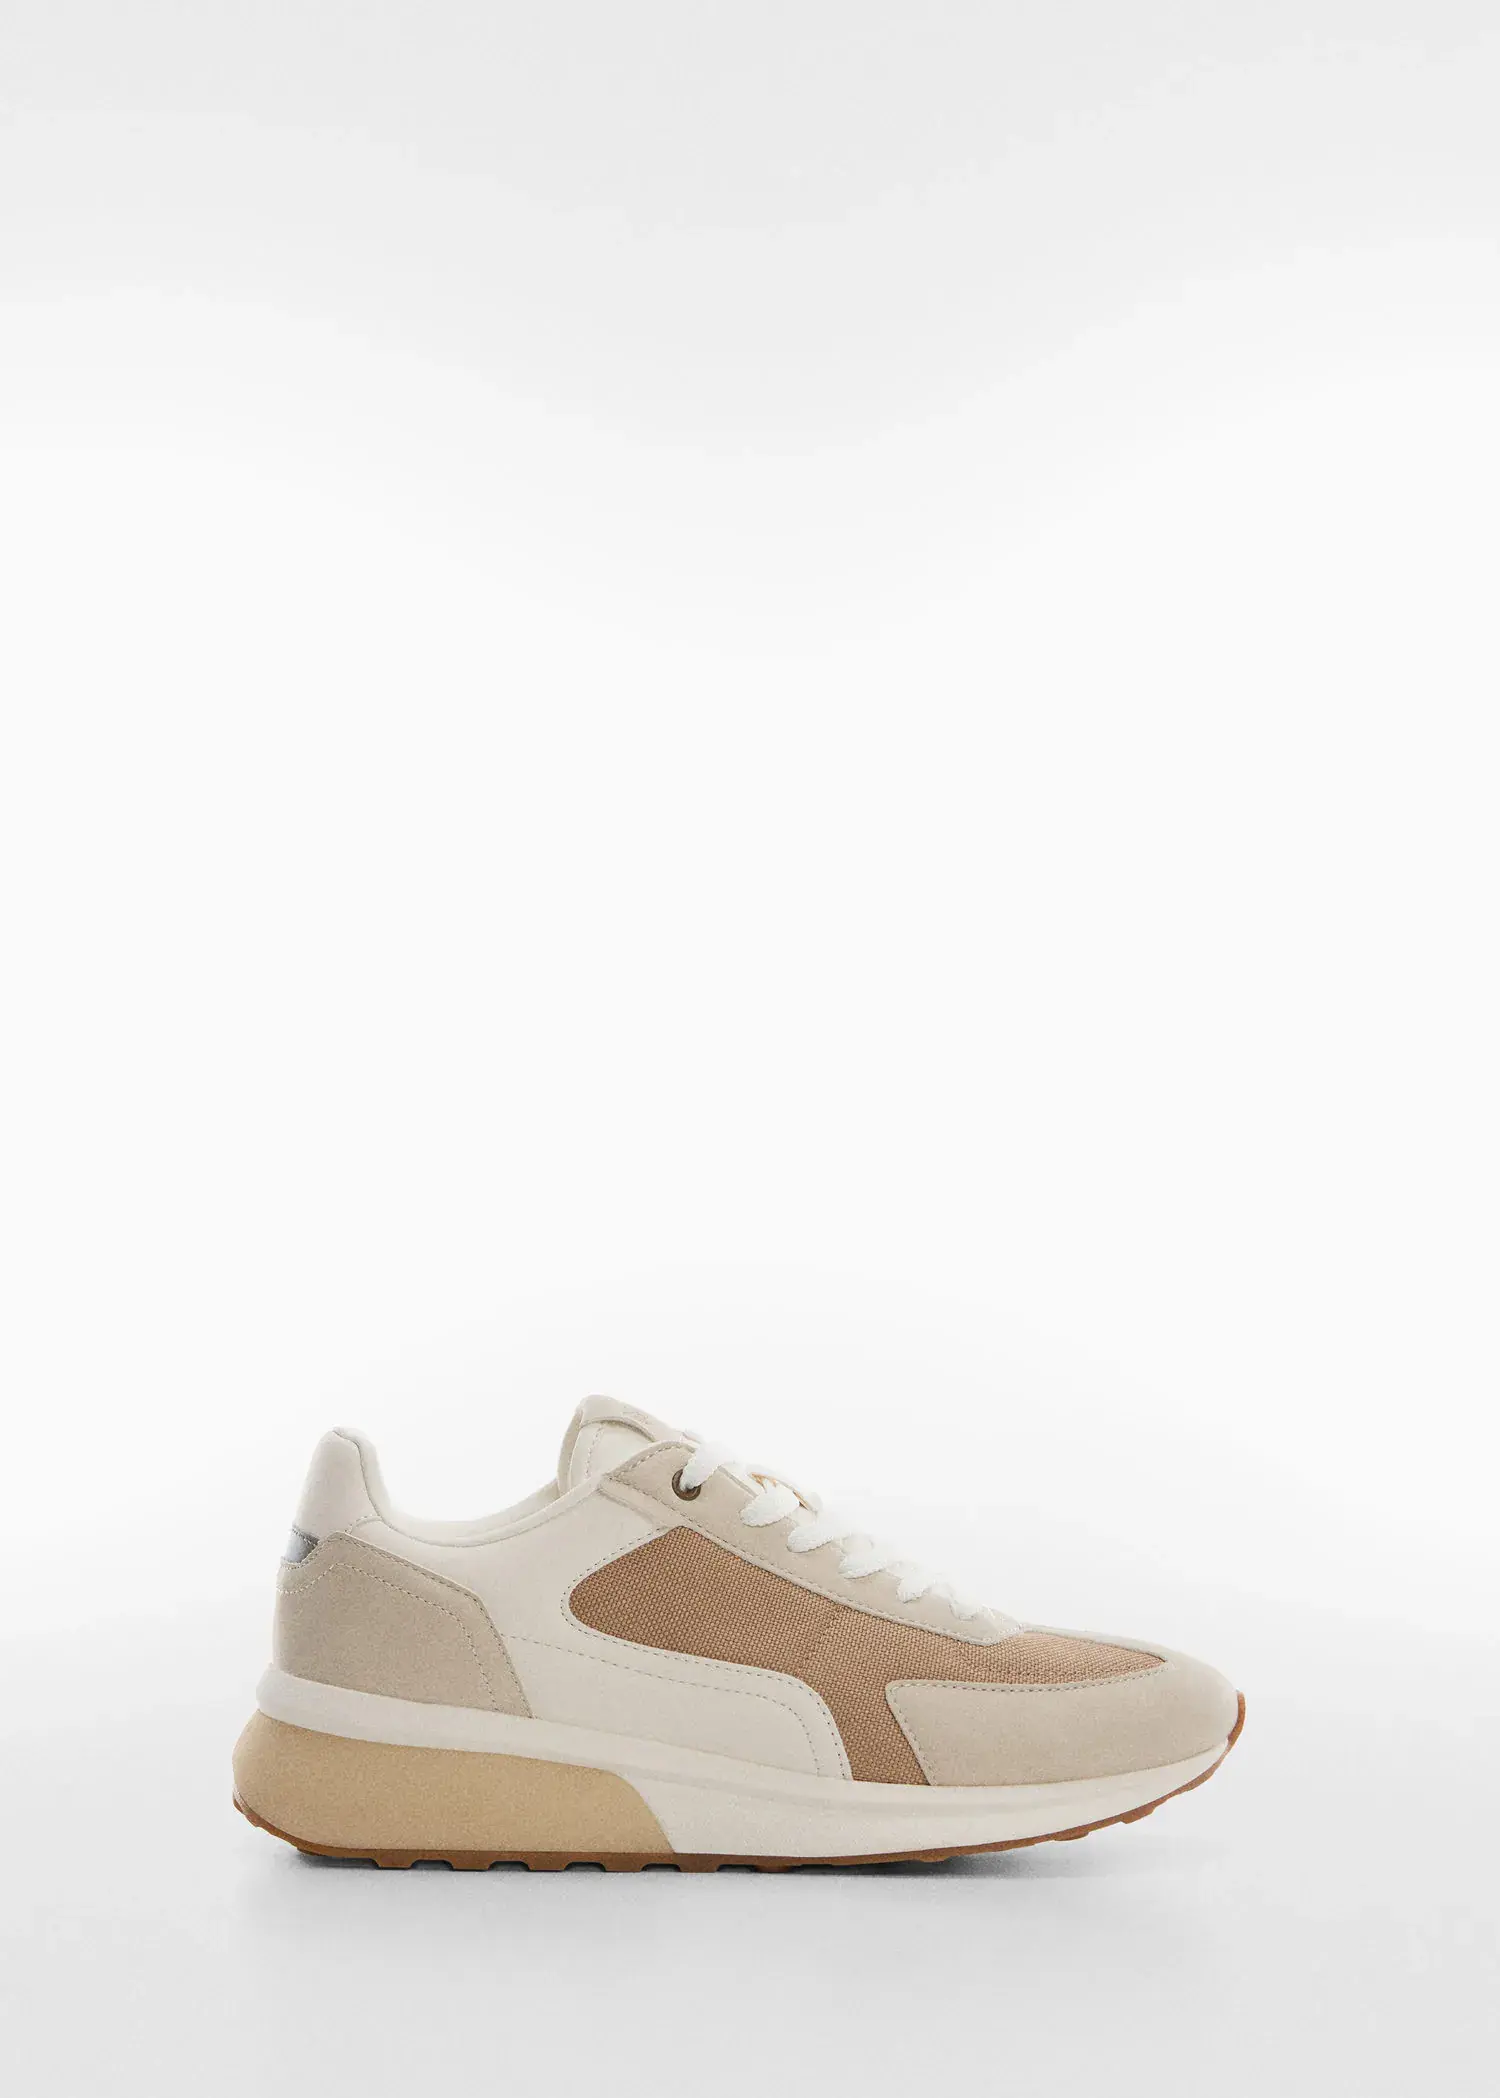 Mango Leather mixed sneakers. a pair of shoes that are white and tan. 